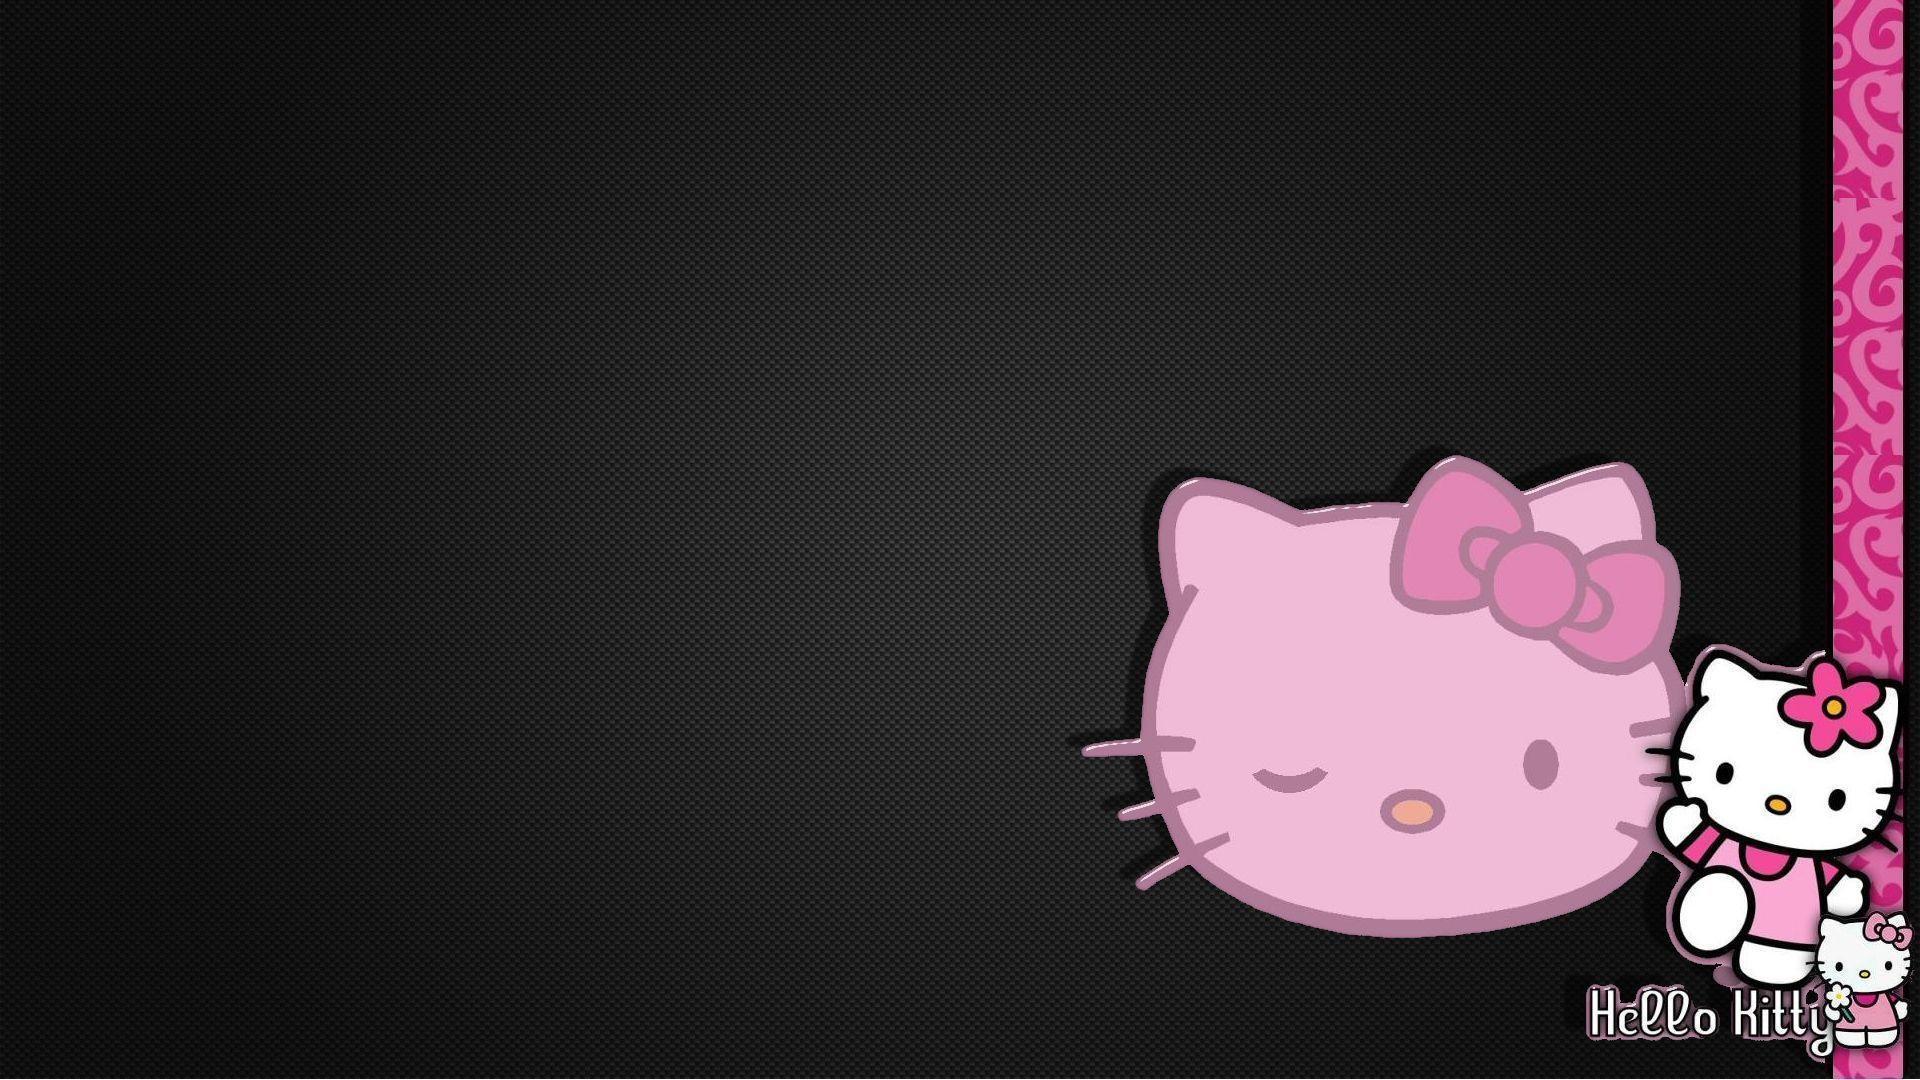 Awesome Best Hello Kitty HD Wallpaper 1920x1080PX Free Hello